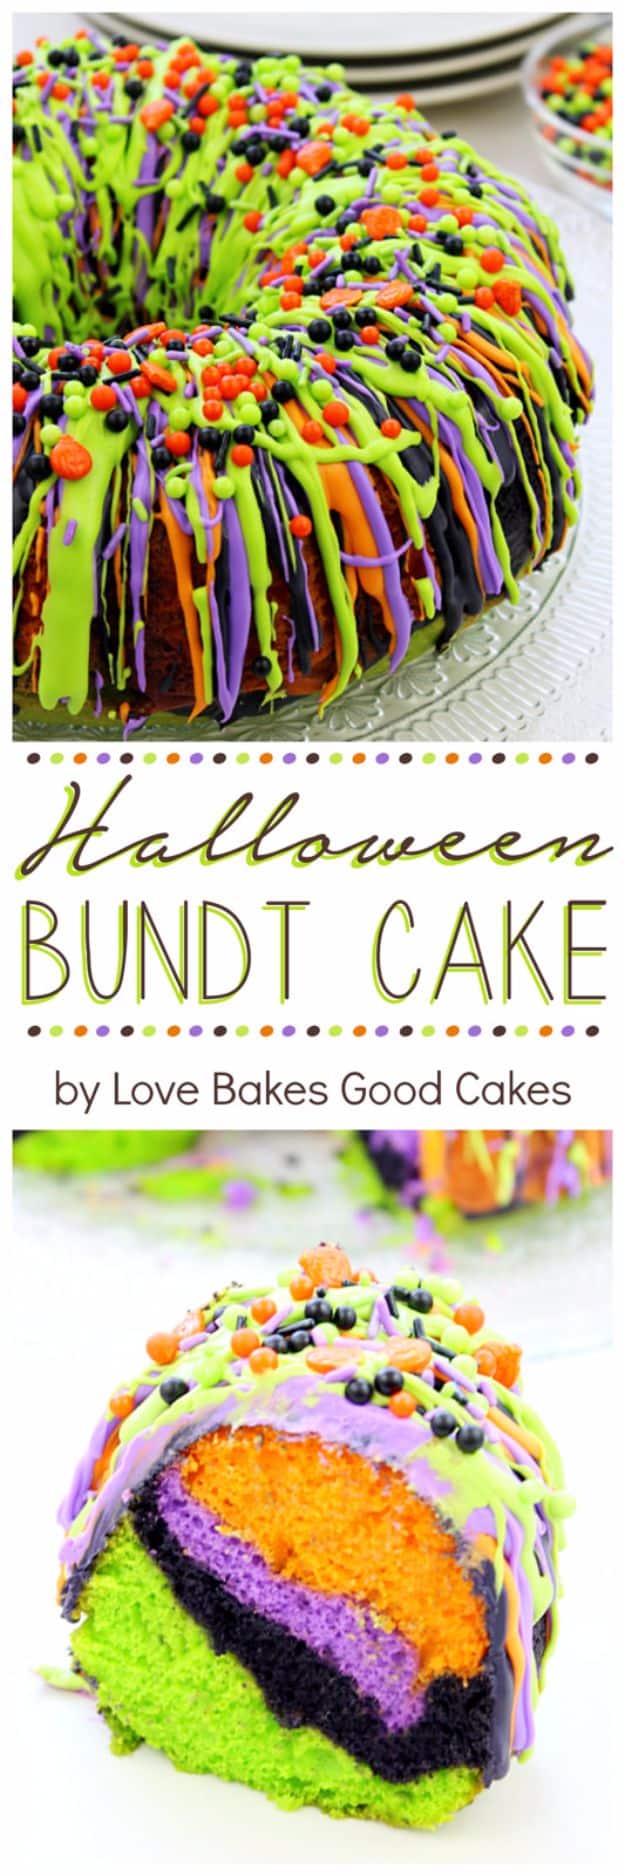 Best Halloween Party Snacks - Halloween Bundt Cake - Healthy Ideas for Kids for School, Teens and Adults - Easy and Quick Recipes and Idea for Dips, Chips, Spooky Cookies and Treats - Appetizers and Finger Foods Made With Vegetables, No Candy, Cheap Food, Scary DIY Party Foods With Step by Step Tutorials #halloween #halloweenrecipes #halloweenparty